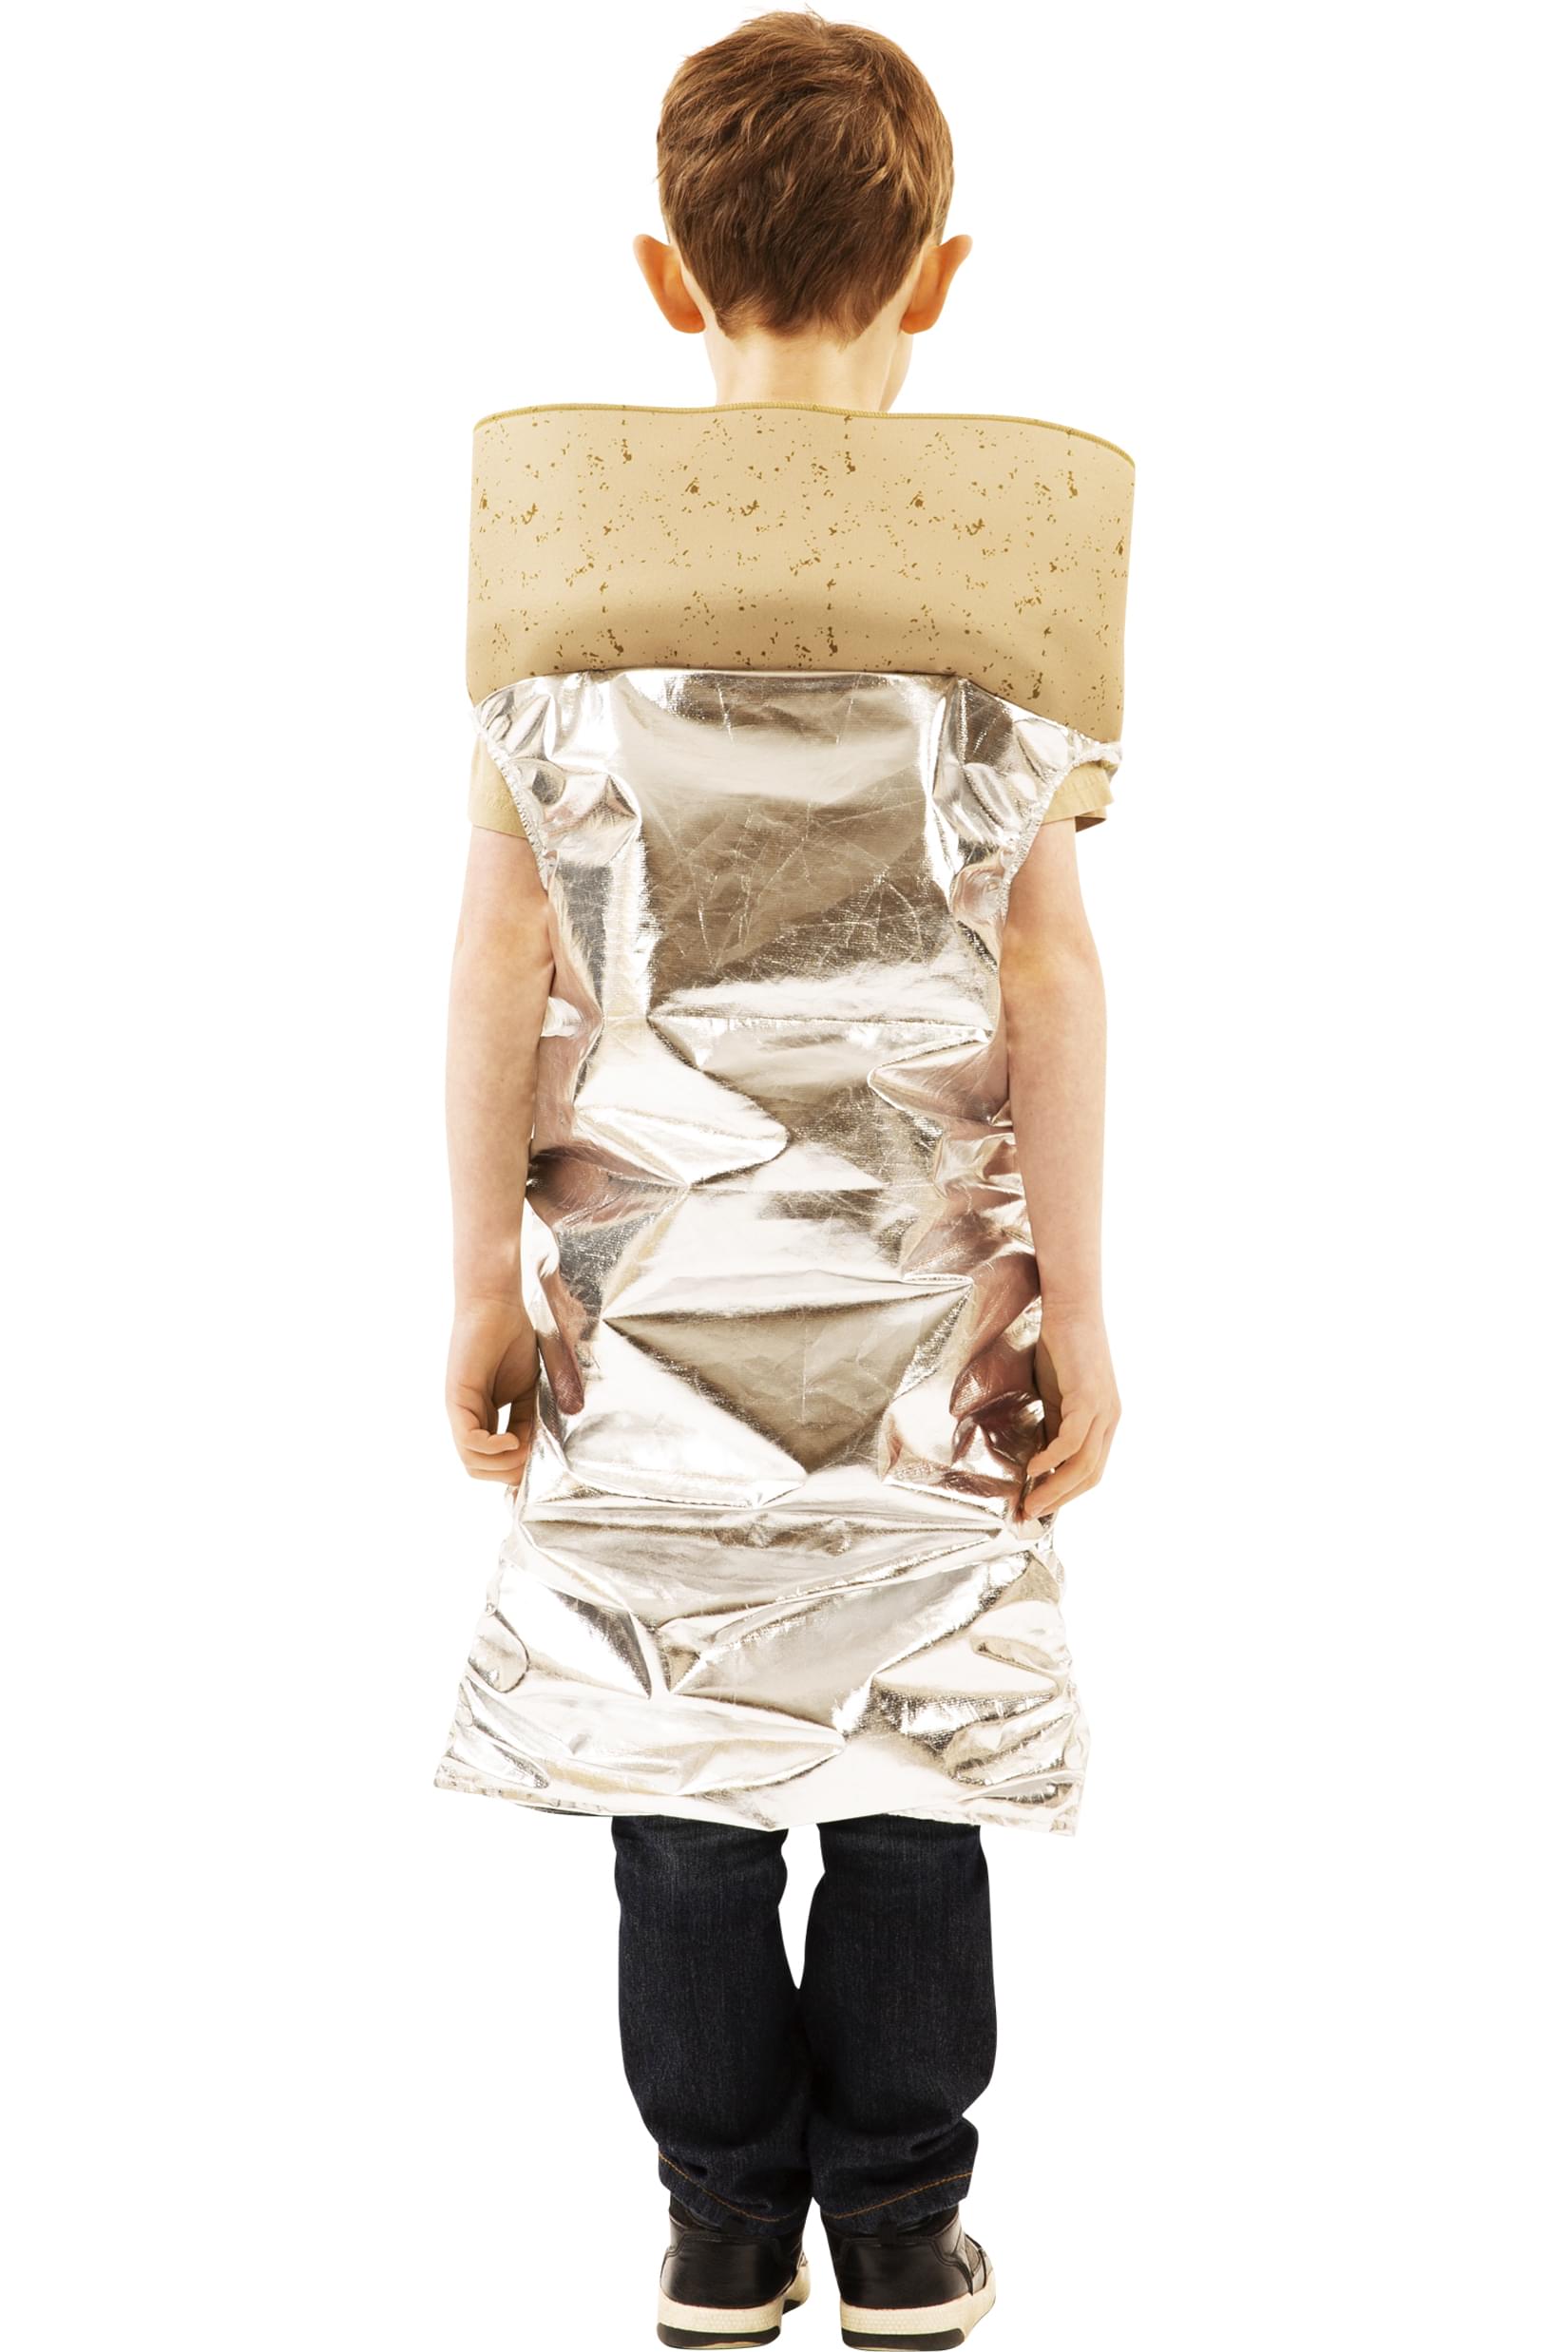 Burrito Costume For Kids | Easy Pull Over Design | Sized To Fit Most Children